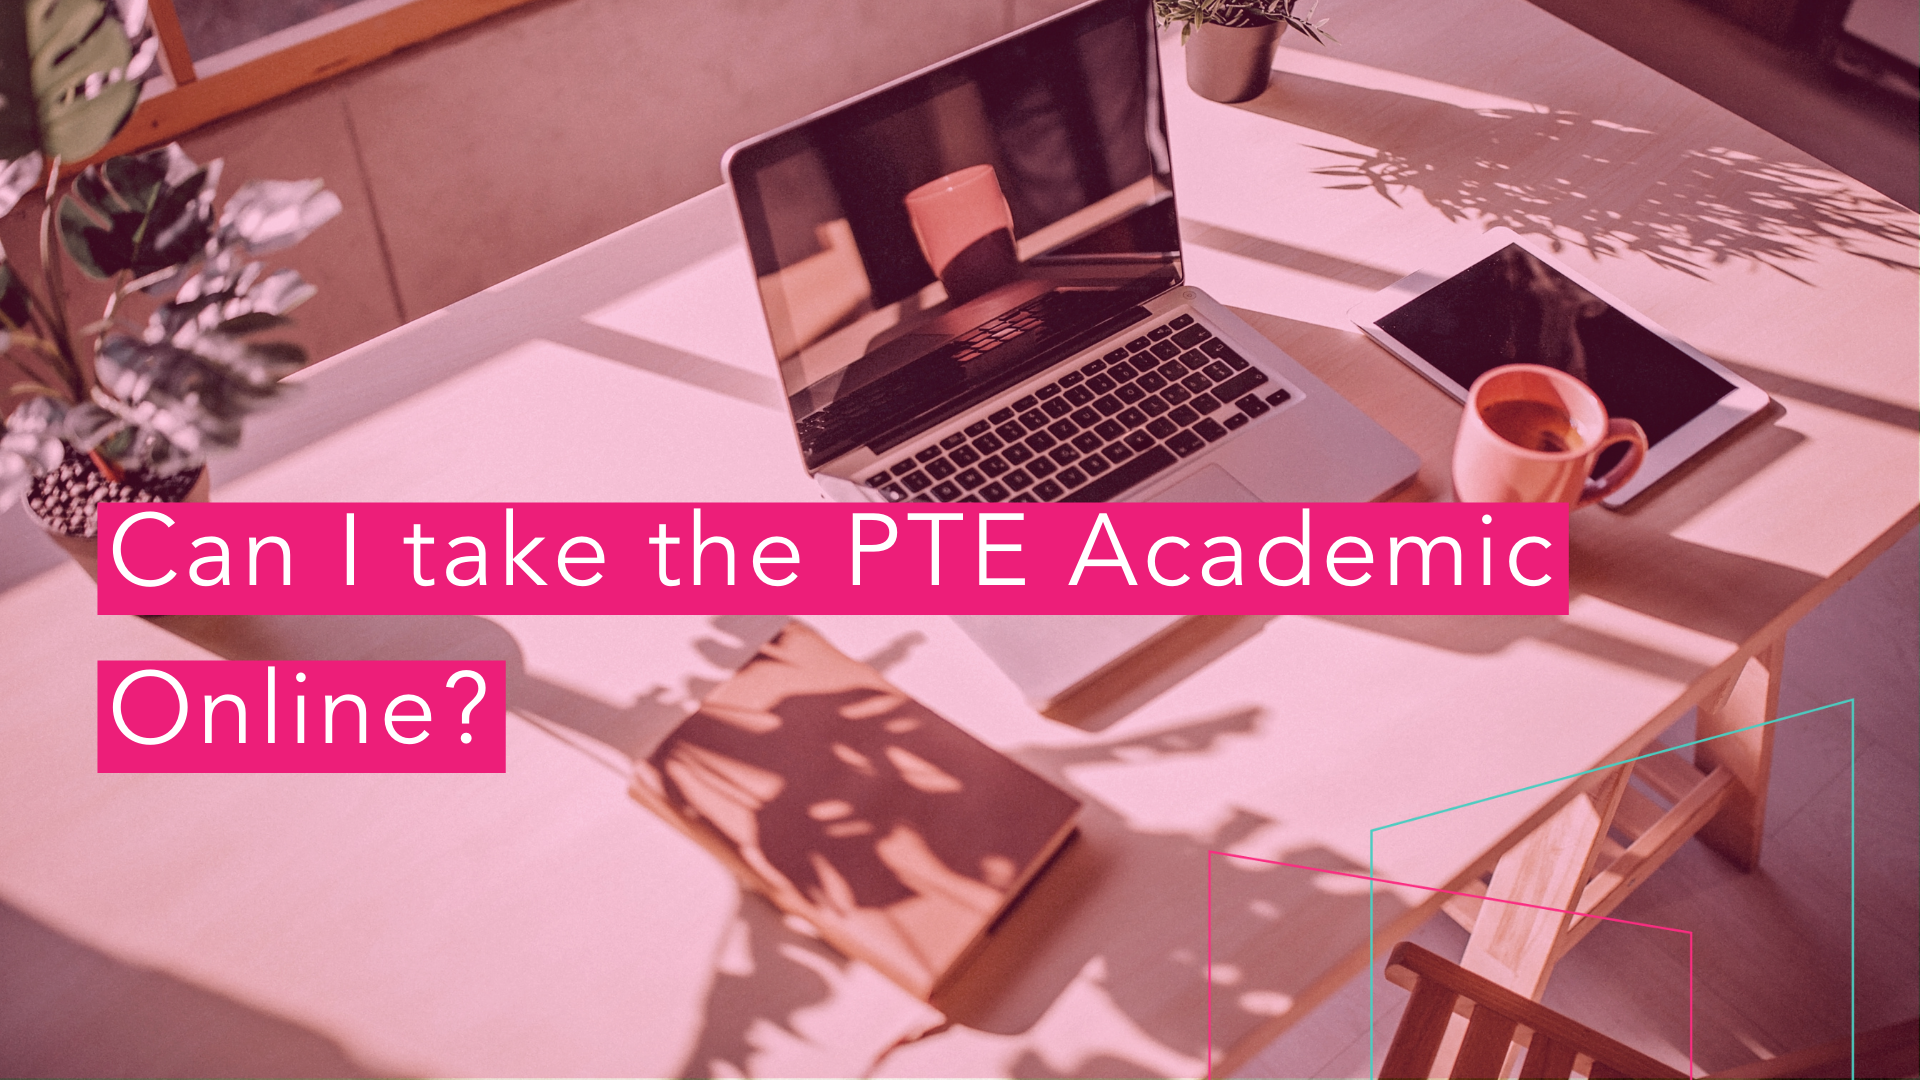 Home office and online PTE Academic